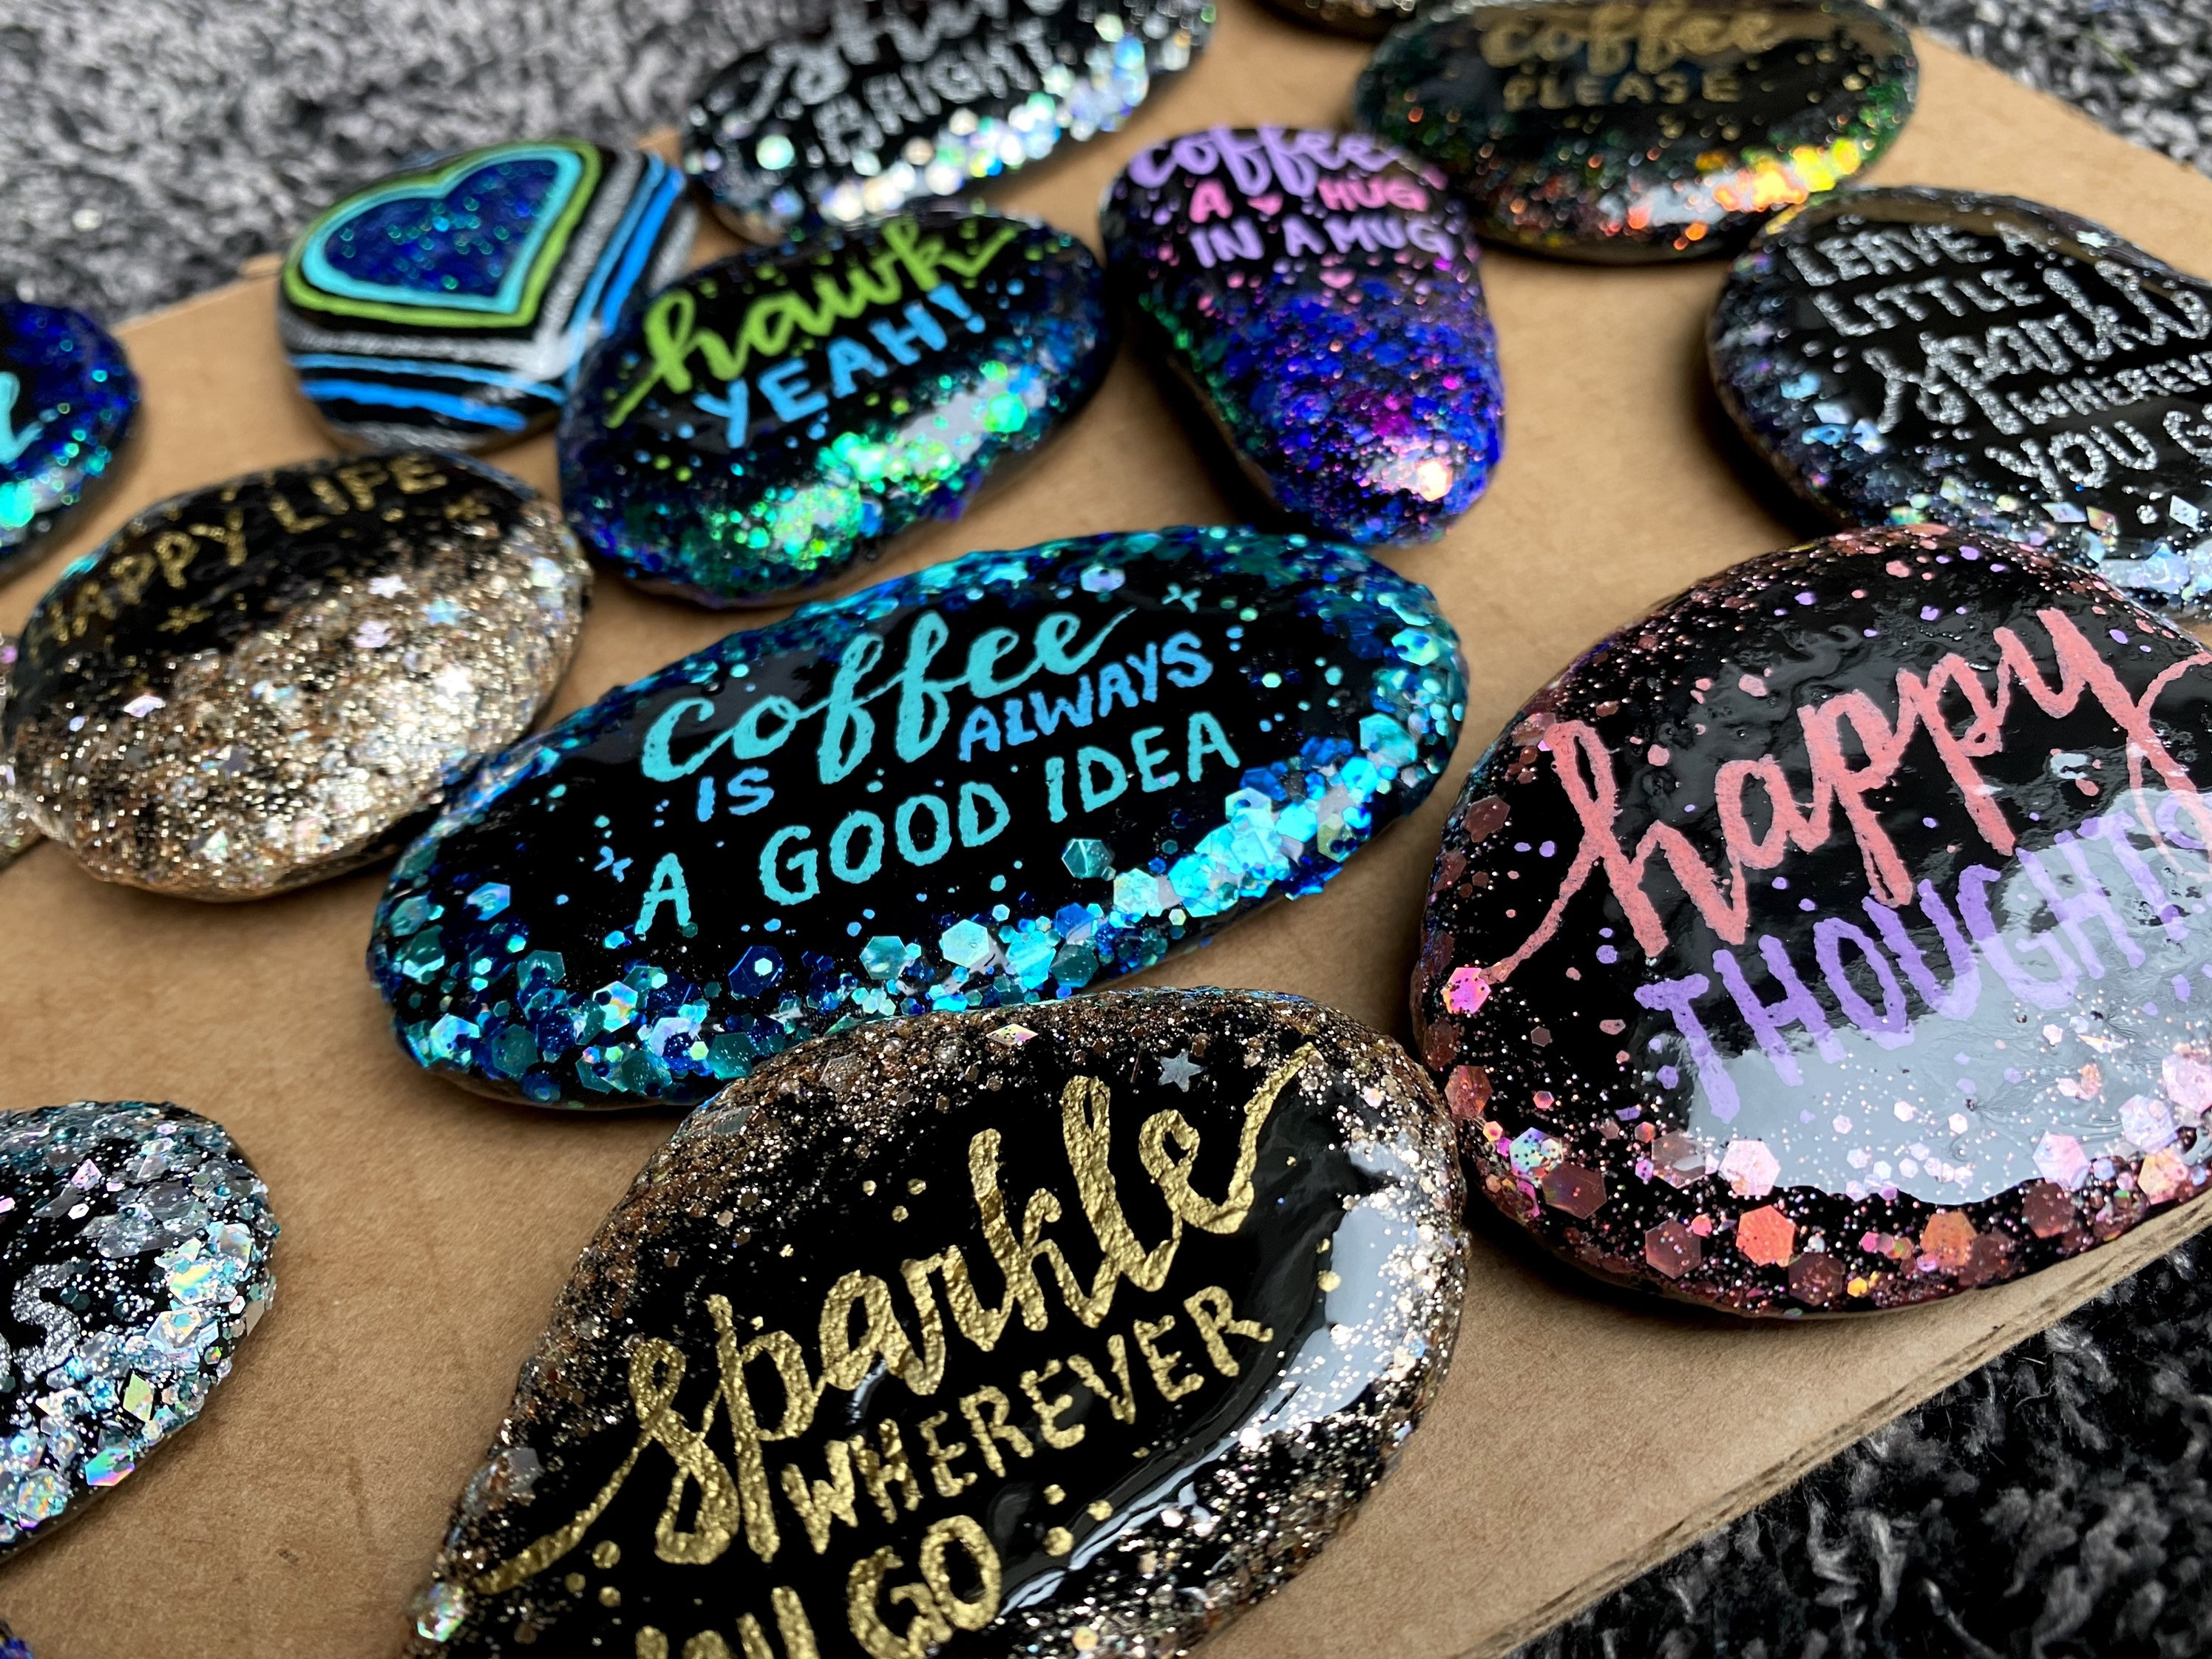 Painting rocks: It's more than just art